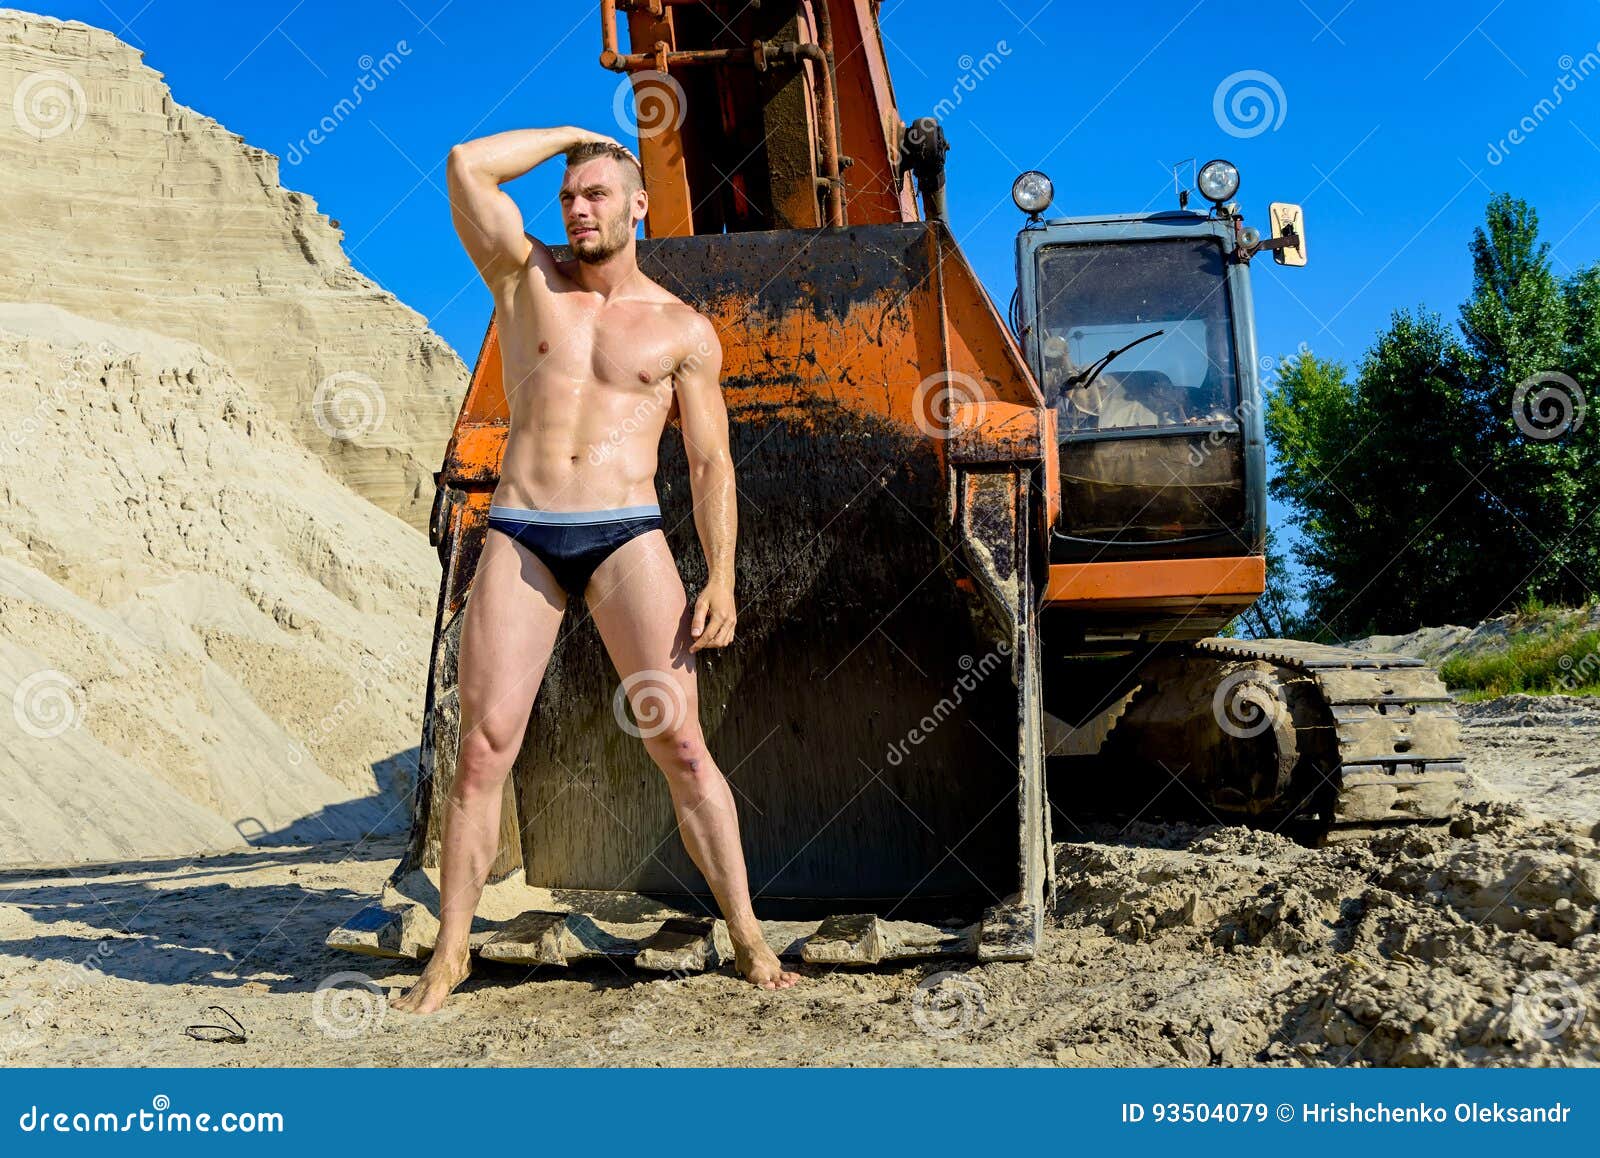 Man Posing in a Bathing Suit on a Background of a Bulldozer Stock Image -  Image of confident, muscles: 93504079